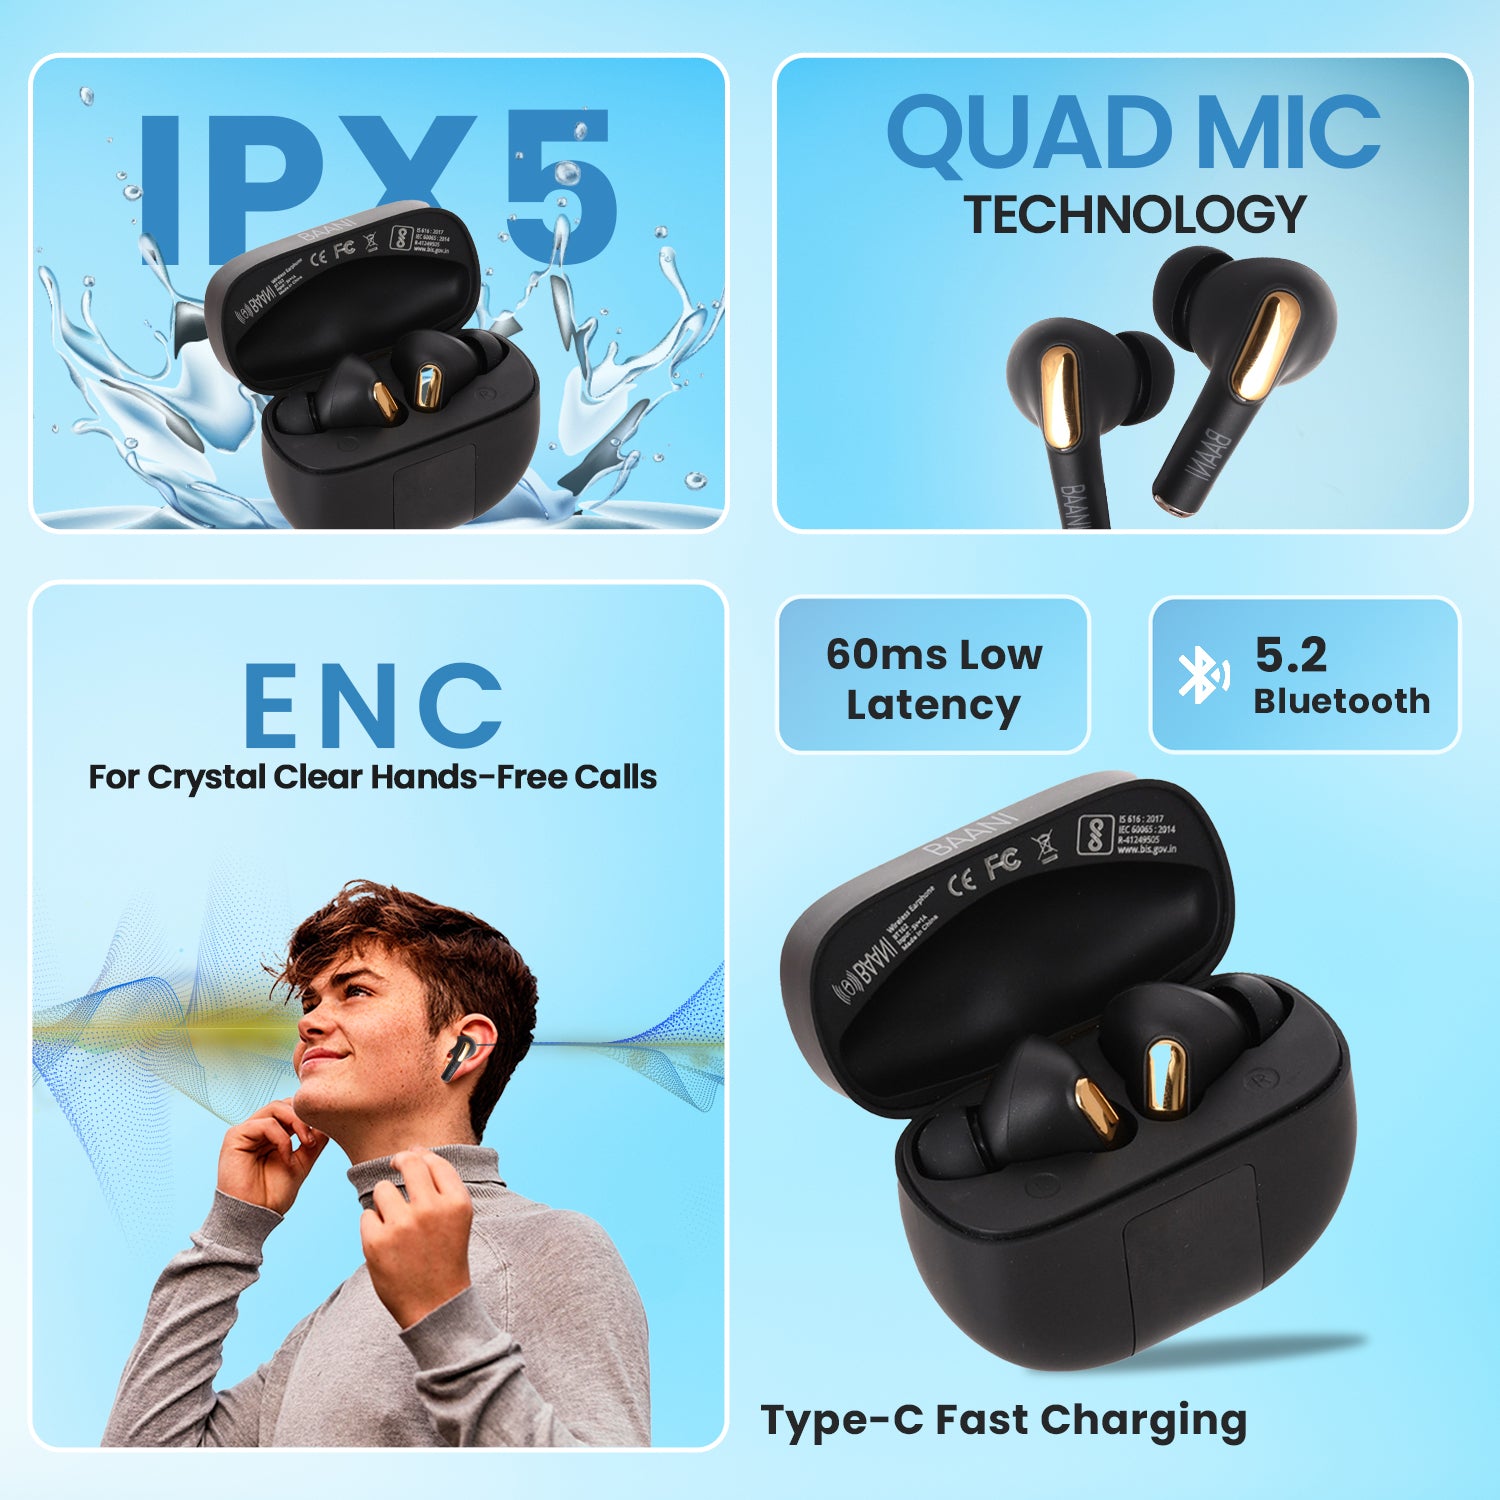 Baani Audio Wireless Earbuds Tws Earphones Bluetooth Quad Mic Technology Enc With 40 Hrs. Playtime Heavy Bass Sound Quality Low Latency For Gaming Mode Ipx5 Smooth Touch Controls-White (Bt102)-In Ear